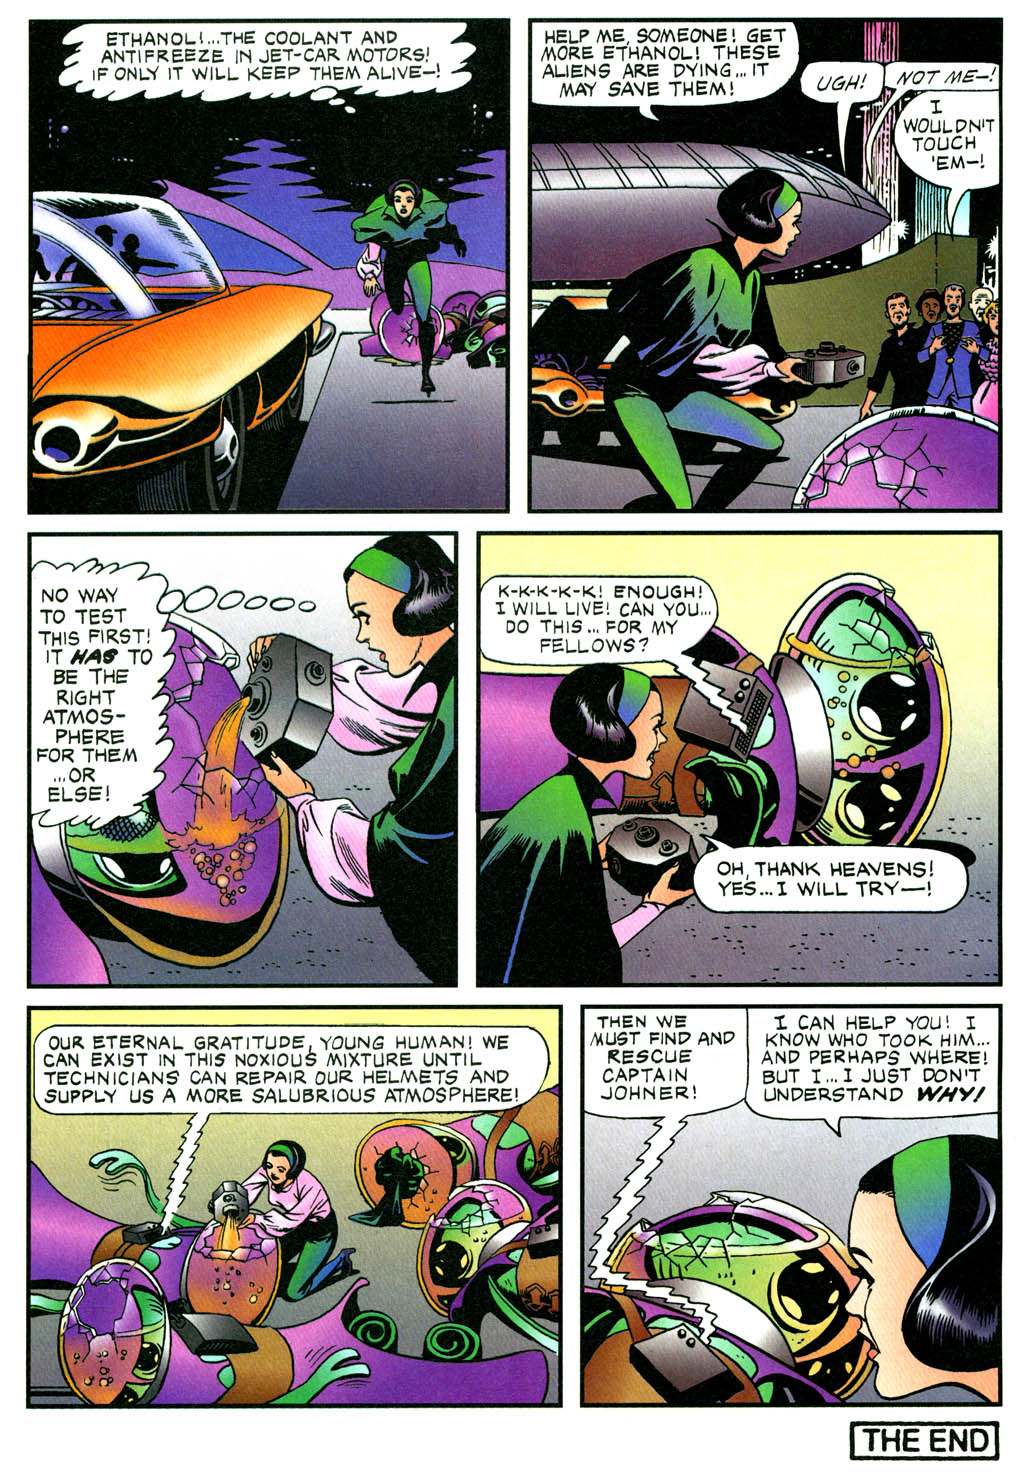 Captain Johner & the Aliens issue 2 - Page 30